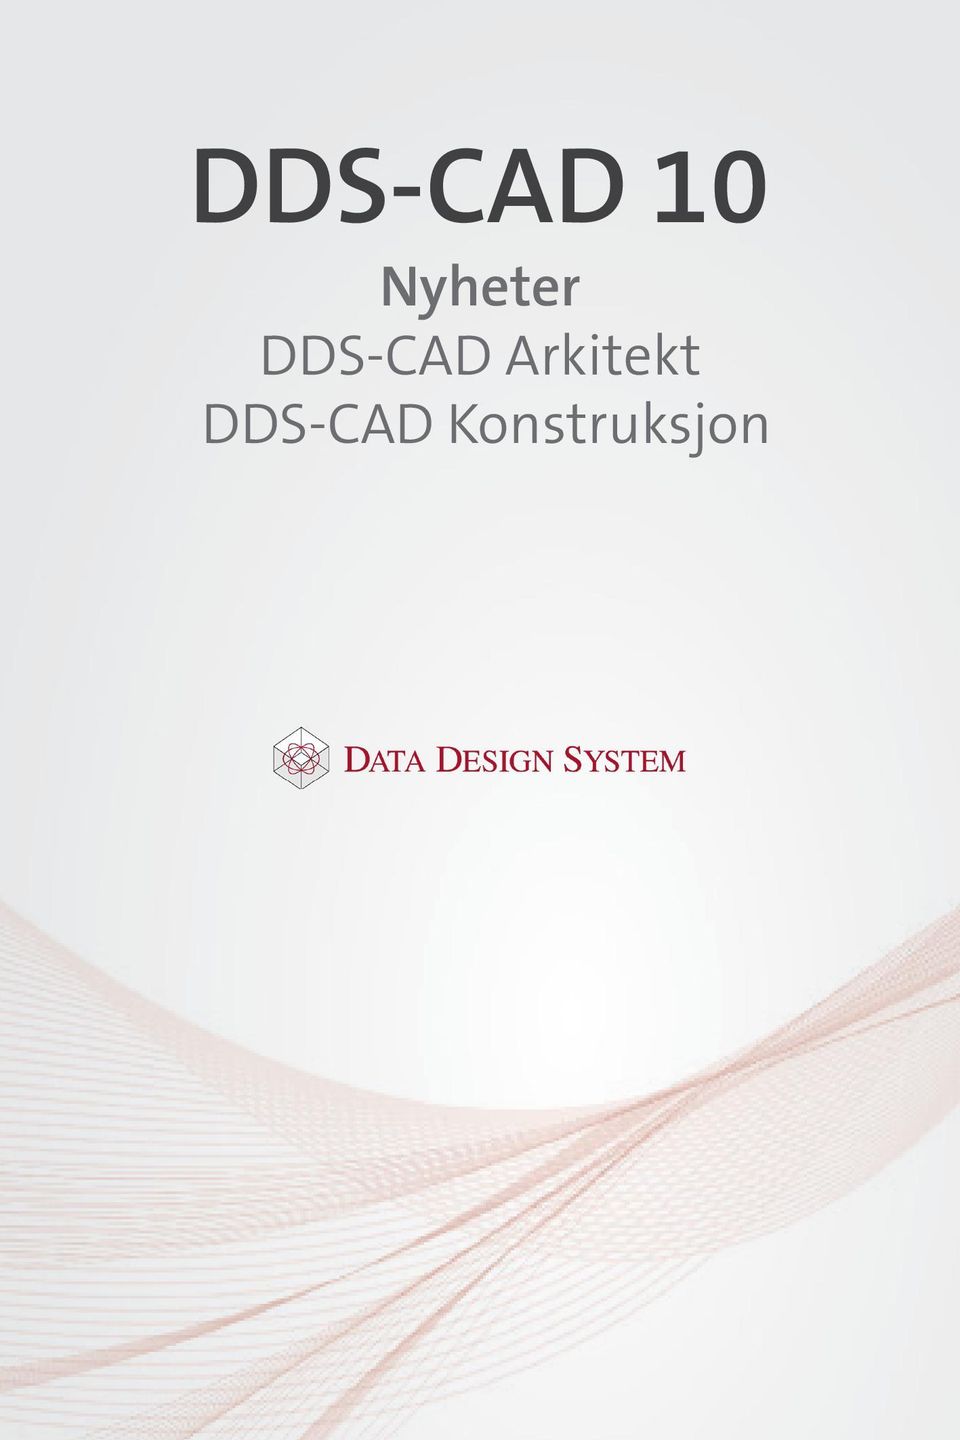 DDS-CAD